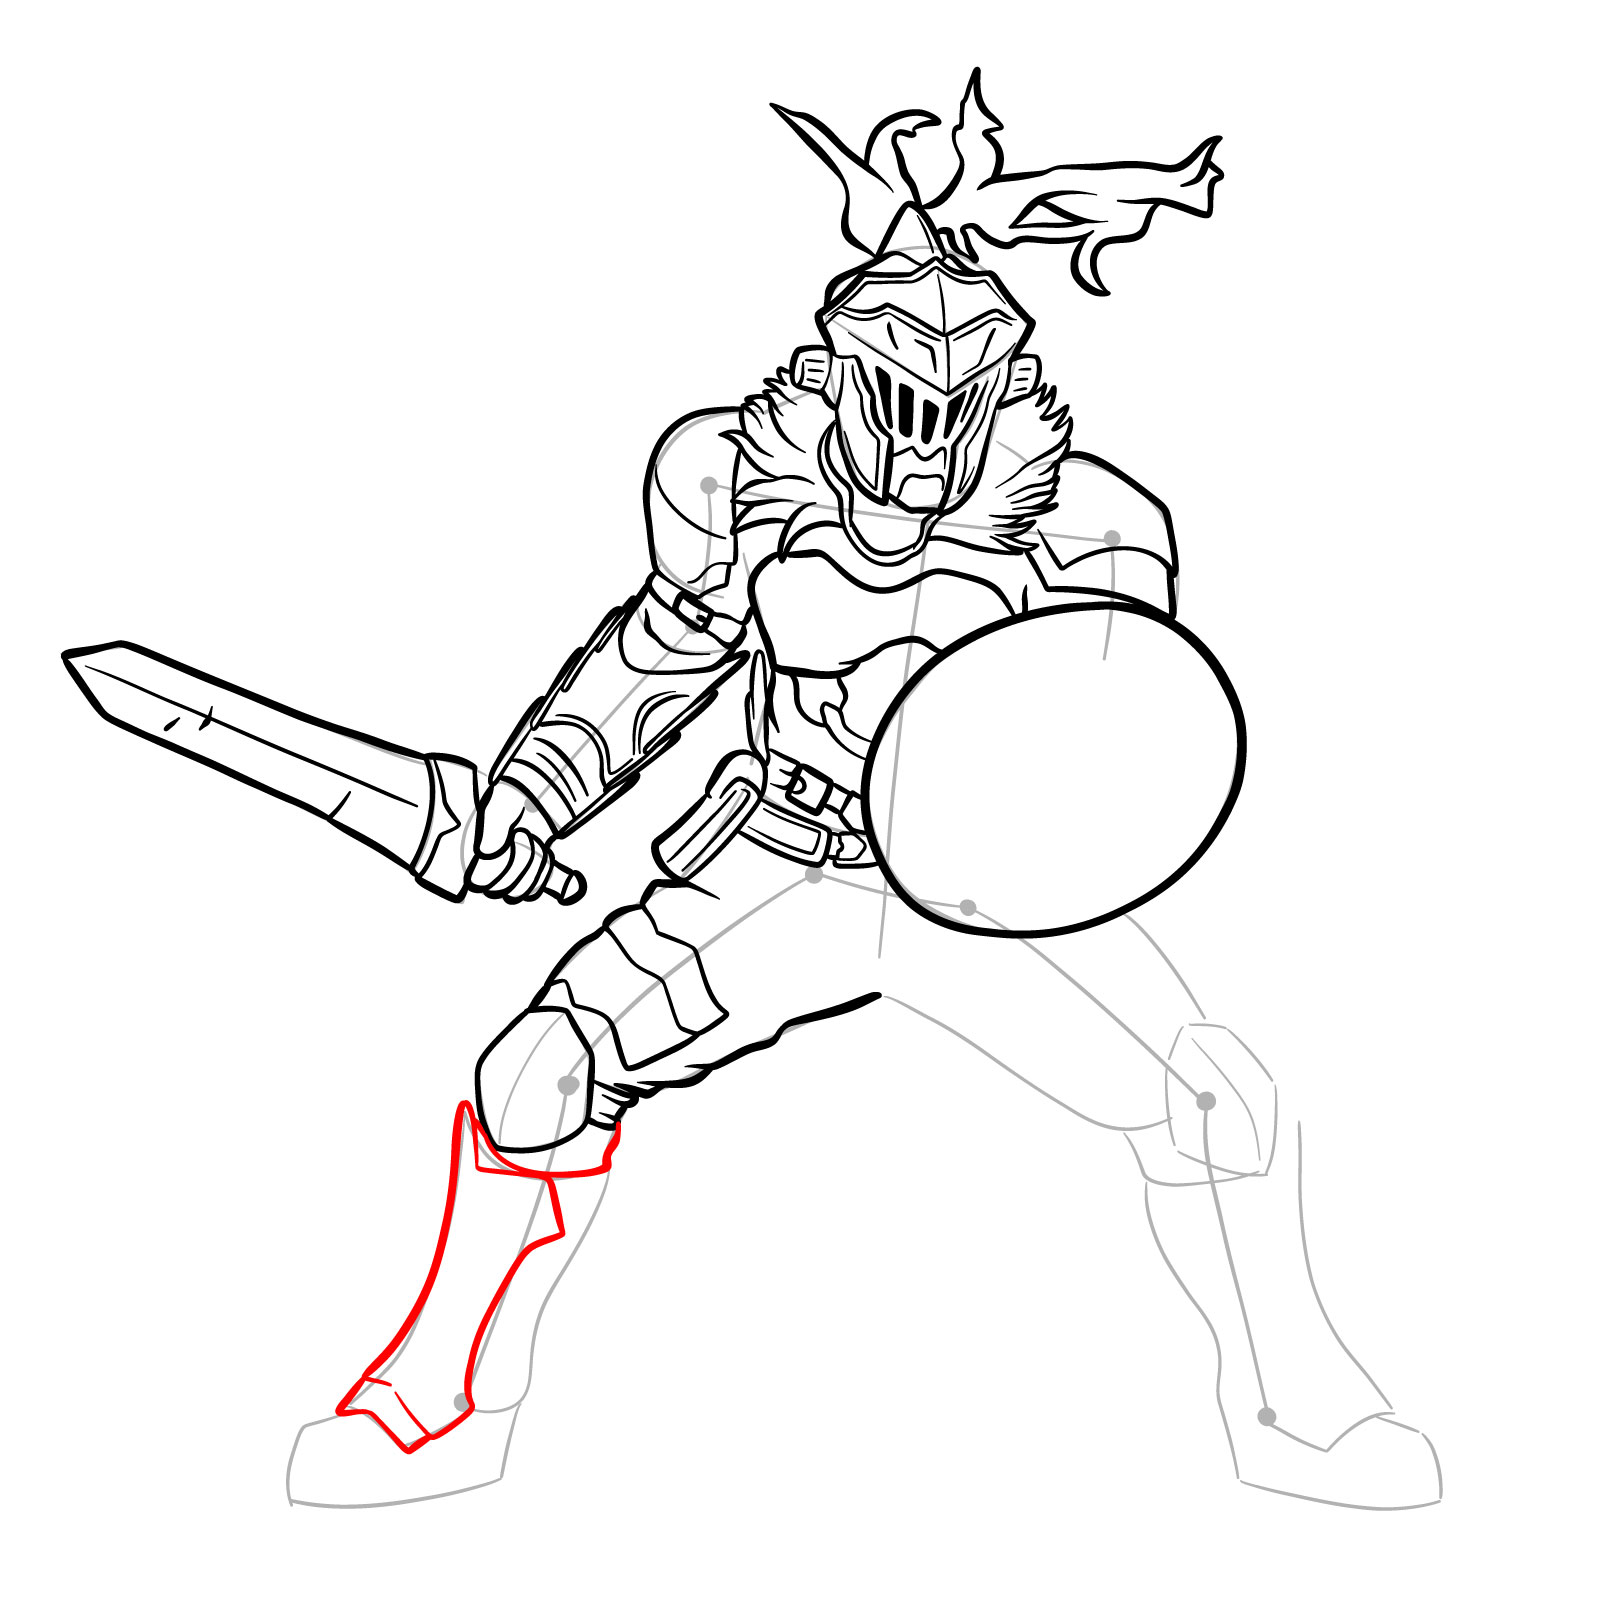 How to Draw Goblin Slayer in battle stance - step 29